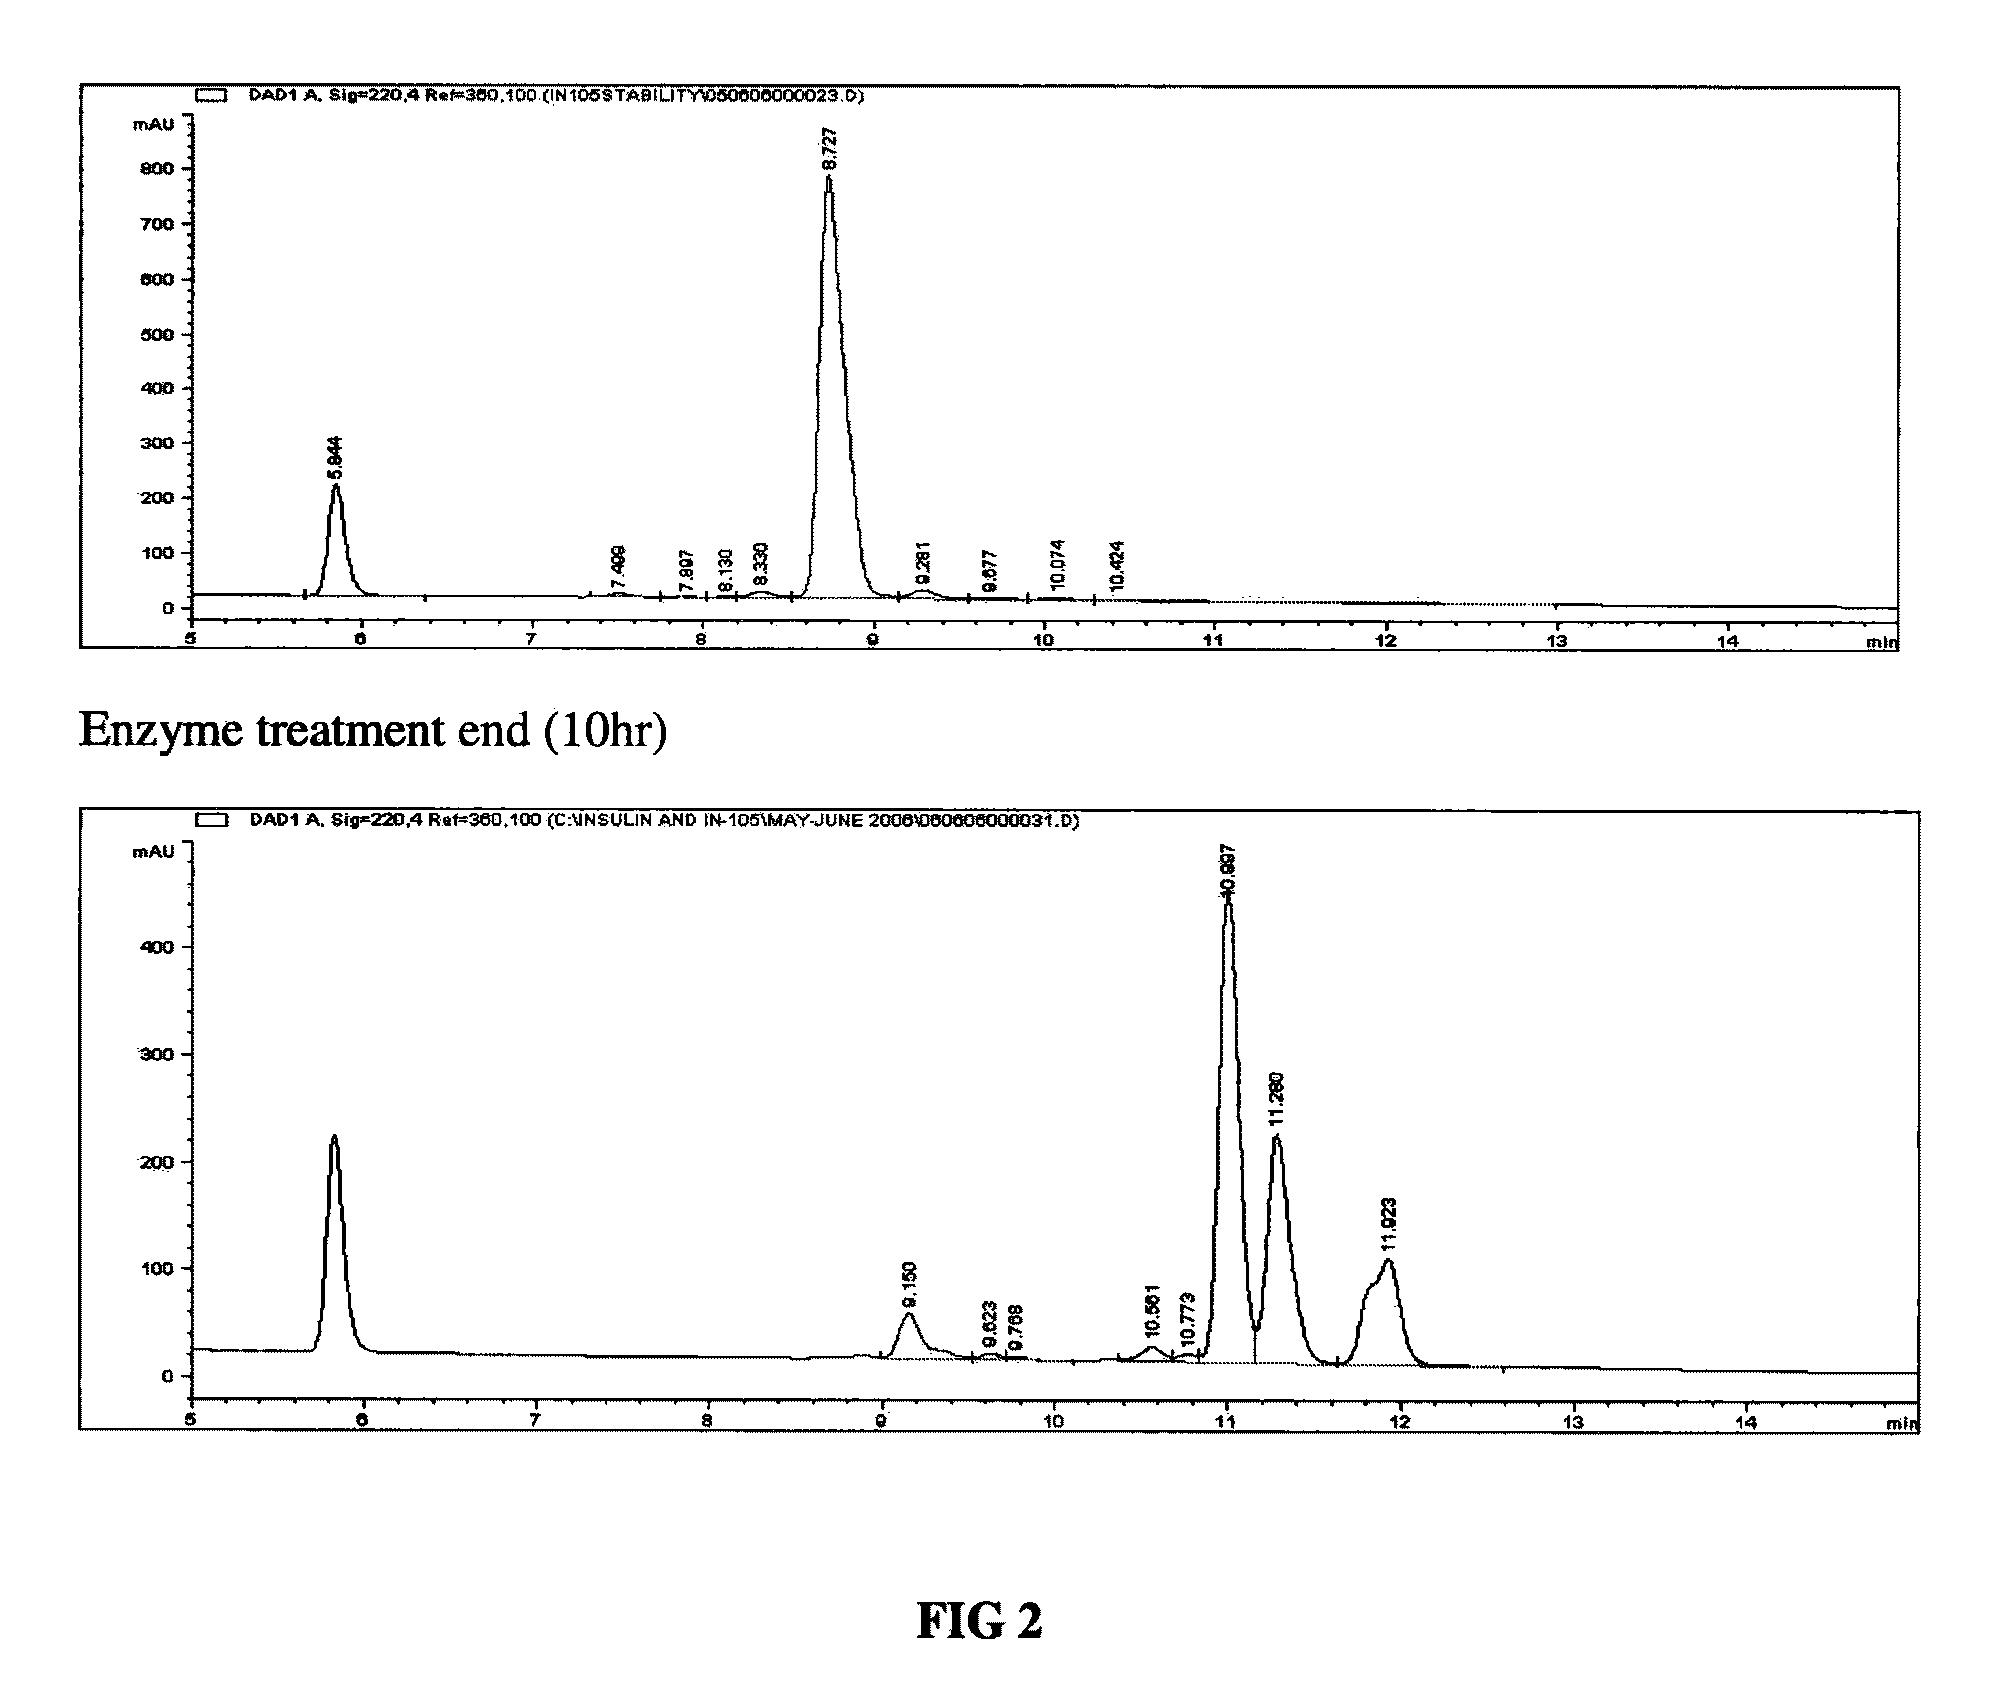 Method of obtaining a purified, biologically active heterologous protein